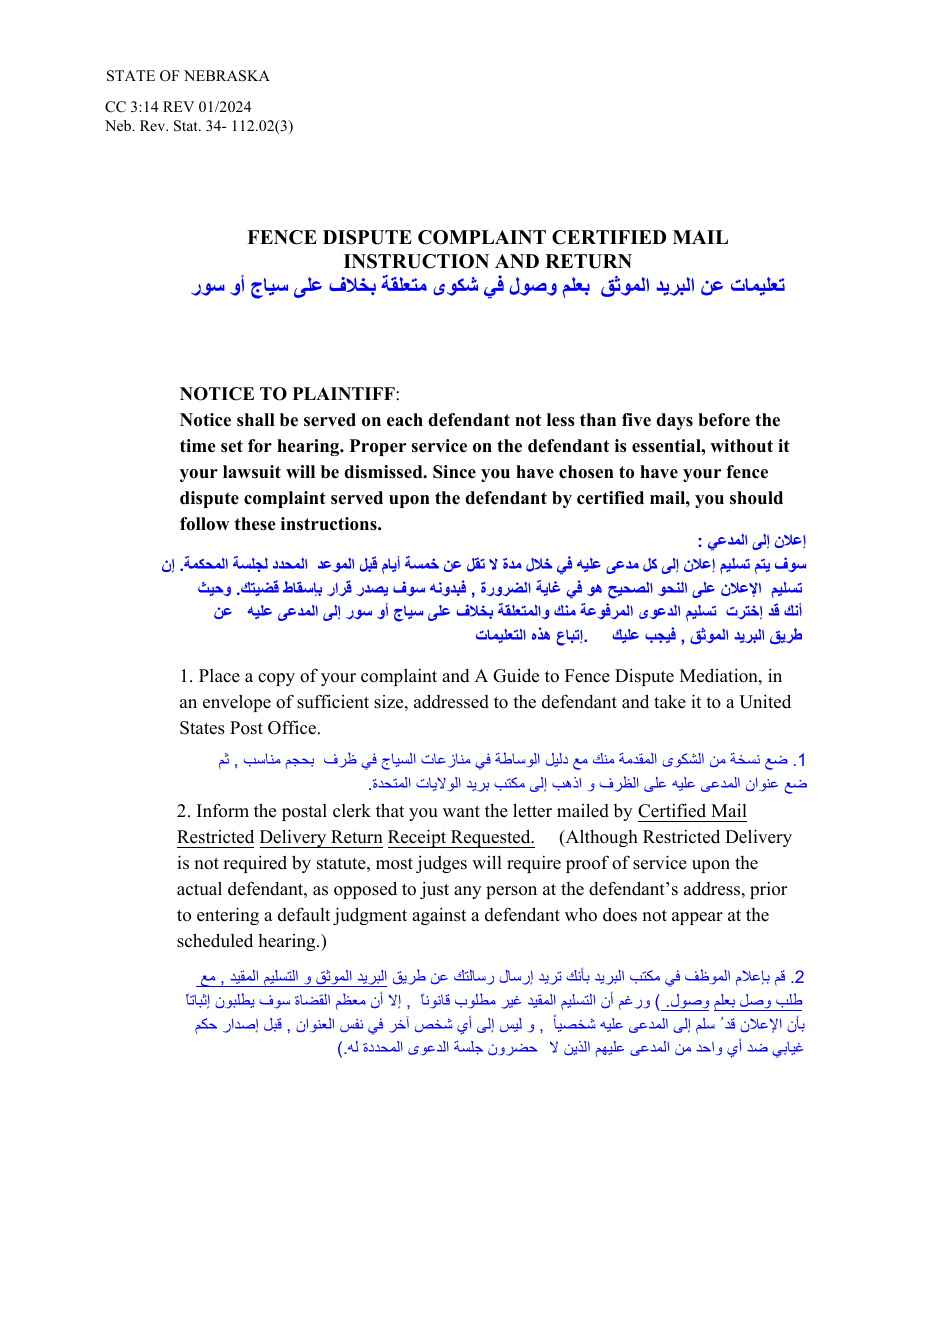 Form CC3:14 Fence Dispute Complaint Certified Mail Instruction and Return - Nebraska (English / Arabic), Page 1